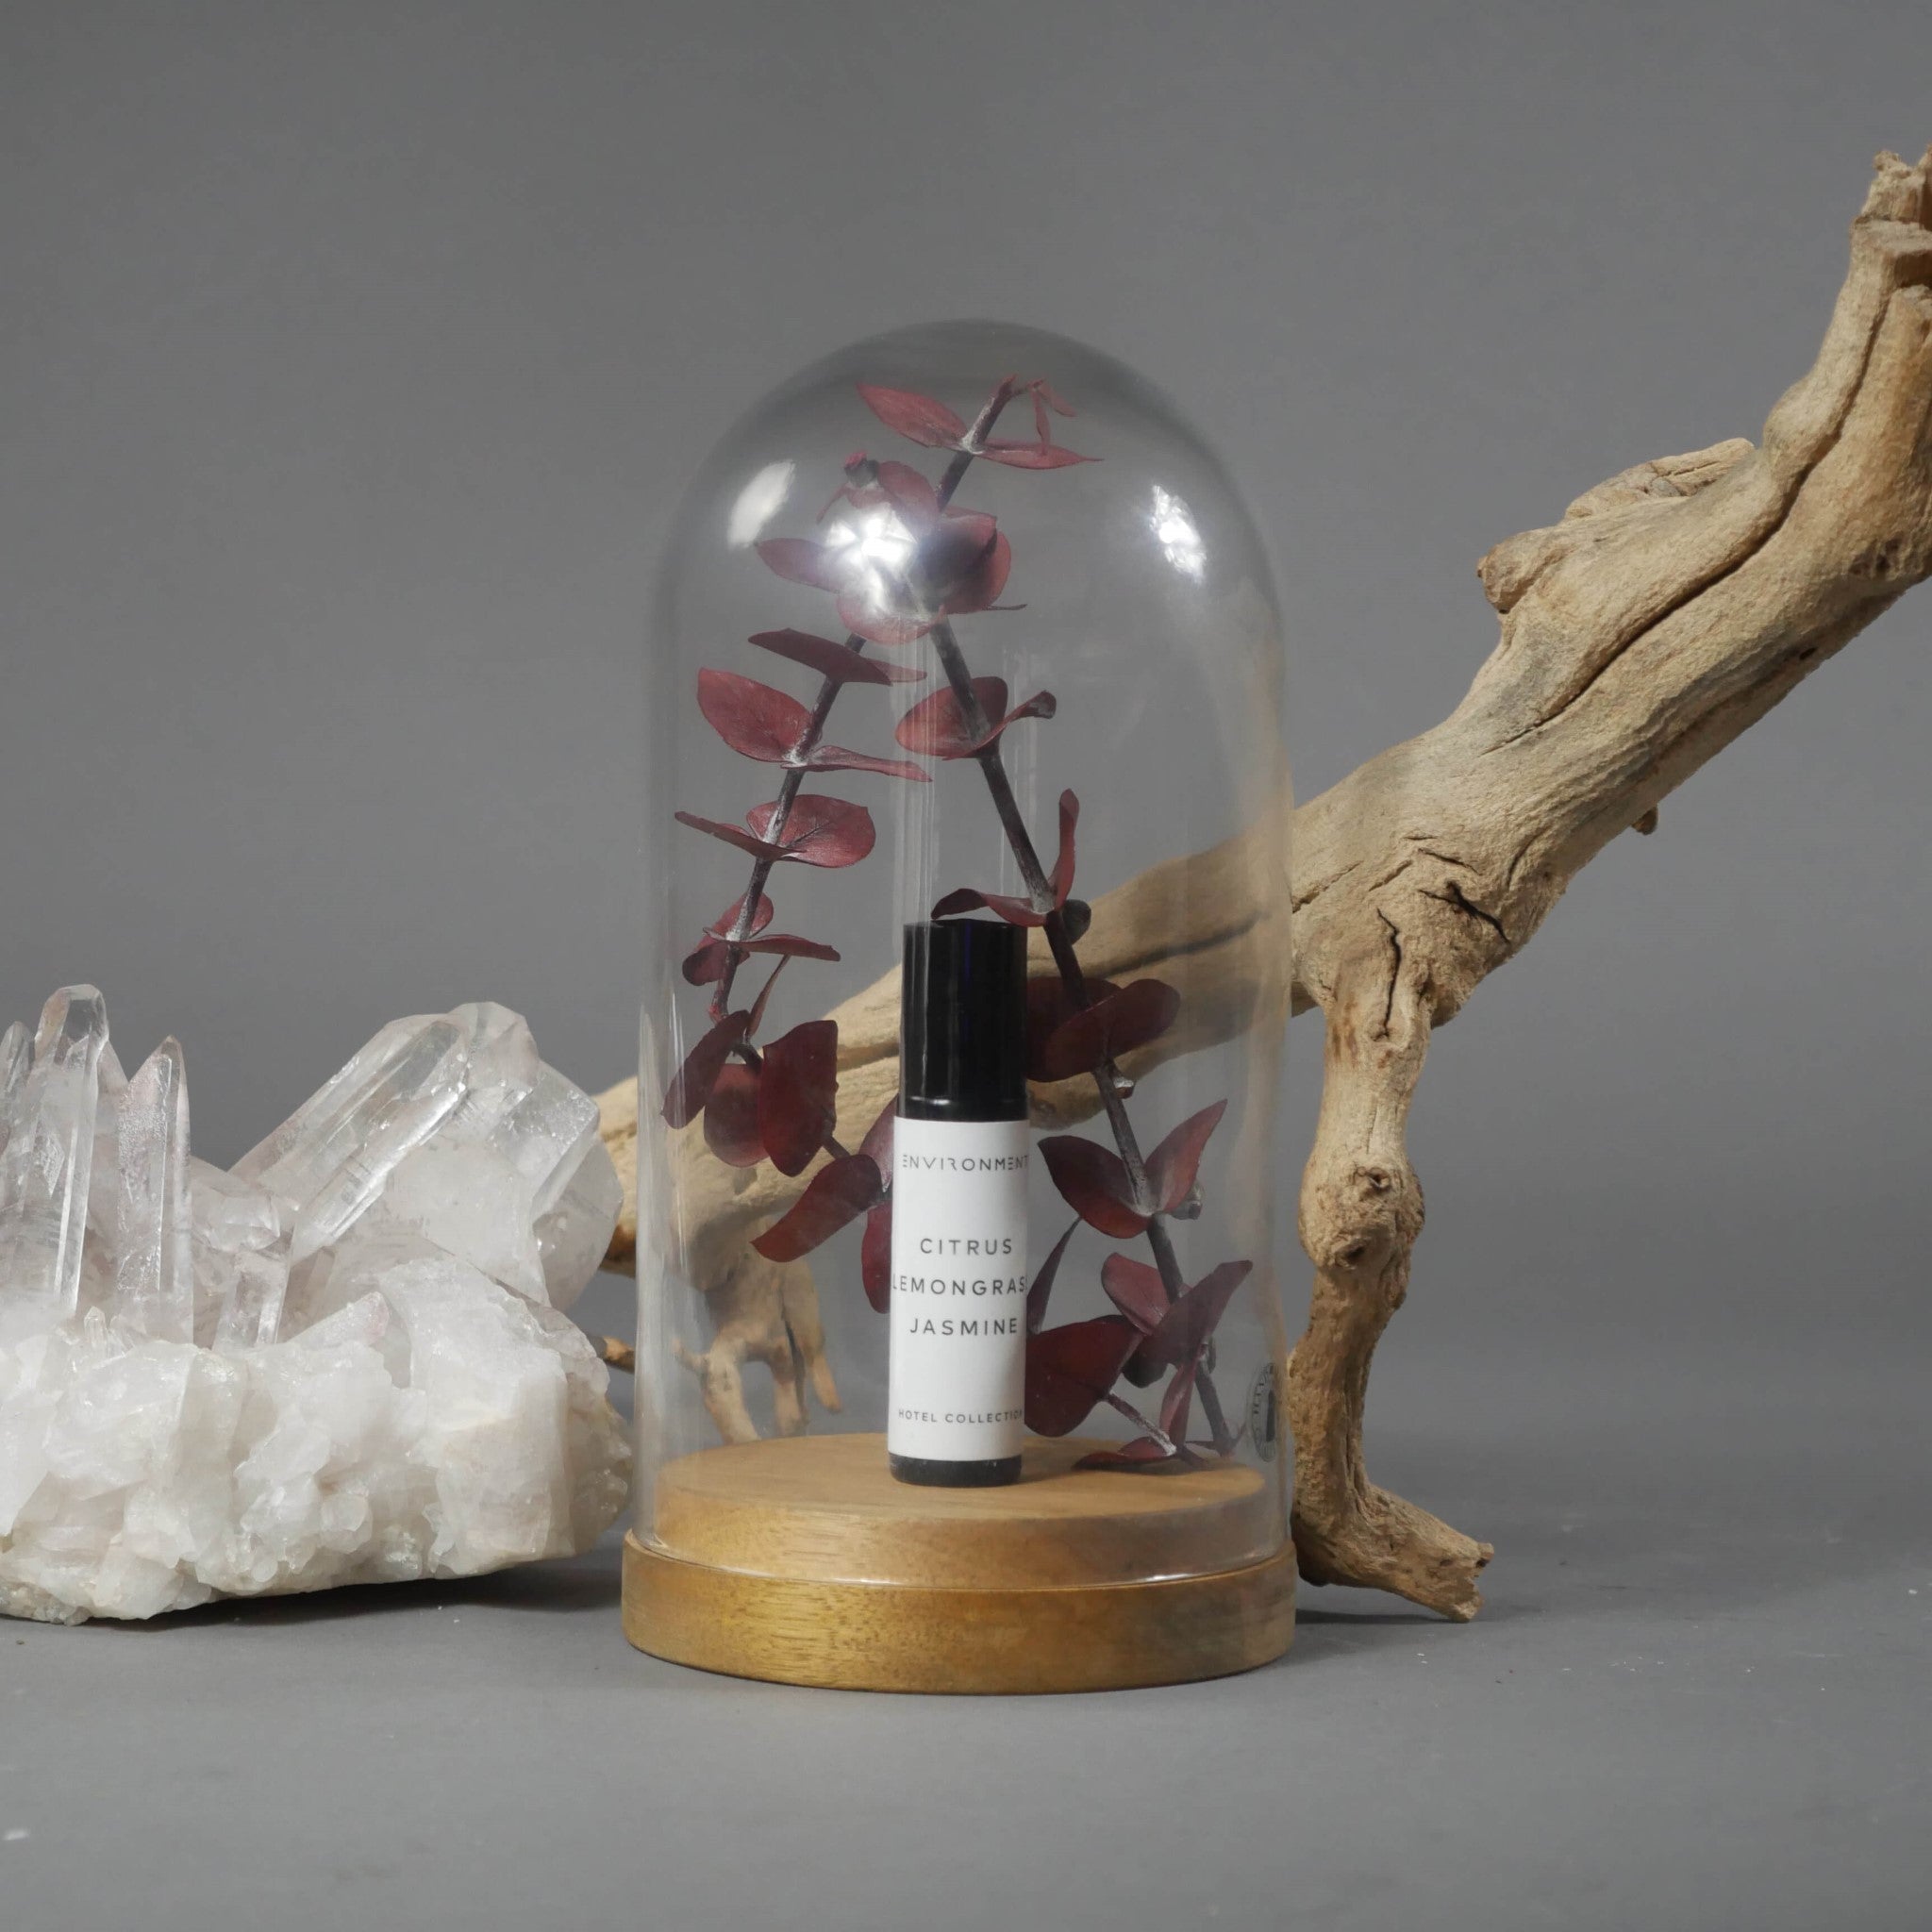 White Woods | Pomegranate | Peony Roll-on Oil Perfume (Inspired by The Aria Hotel®)